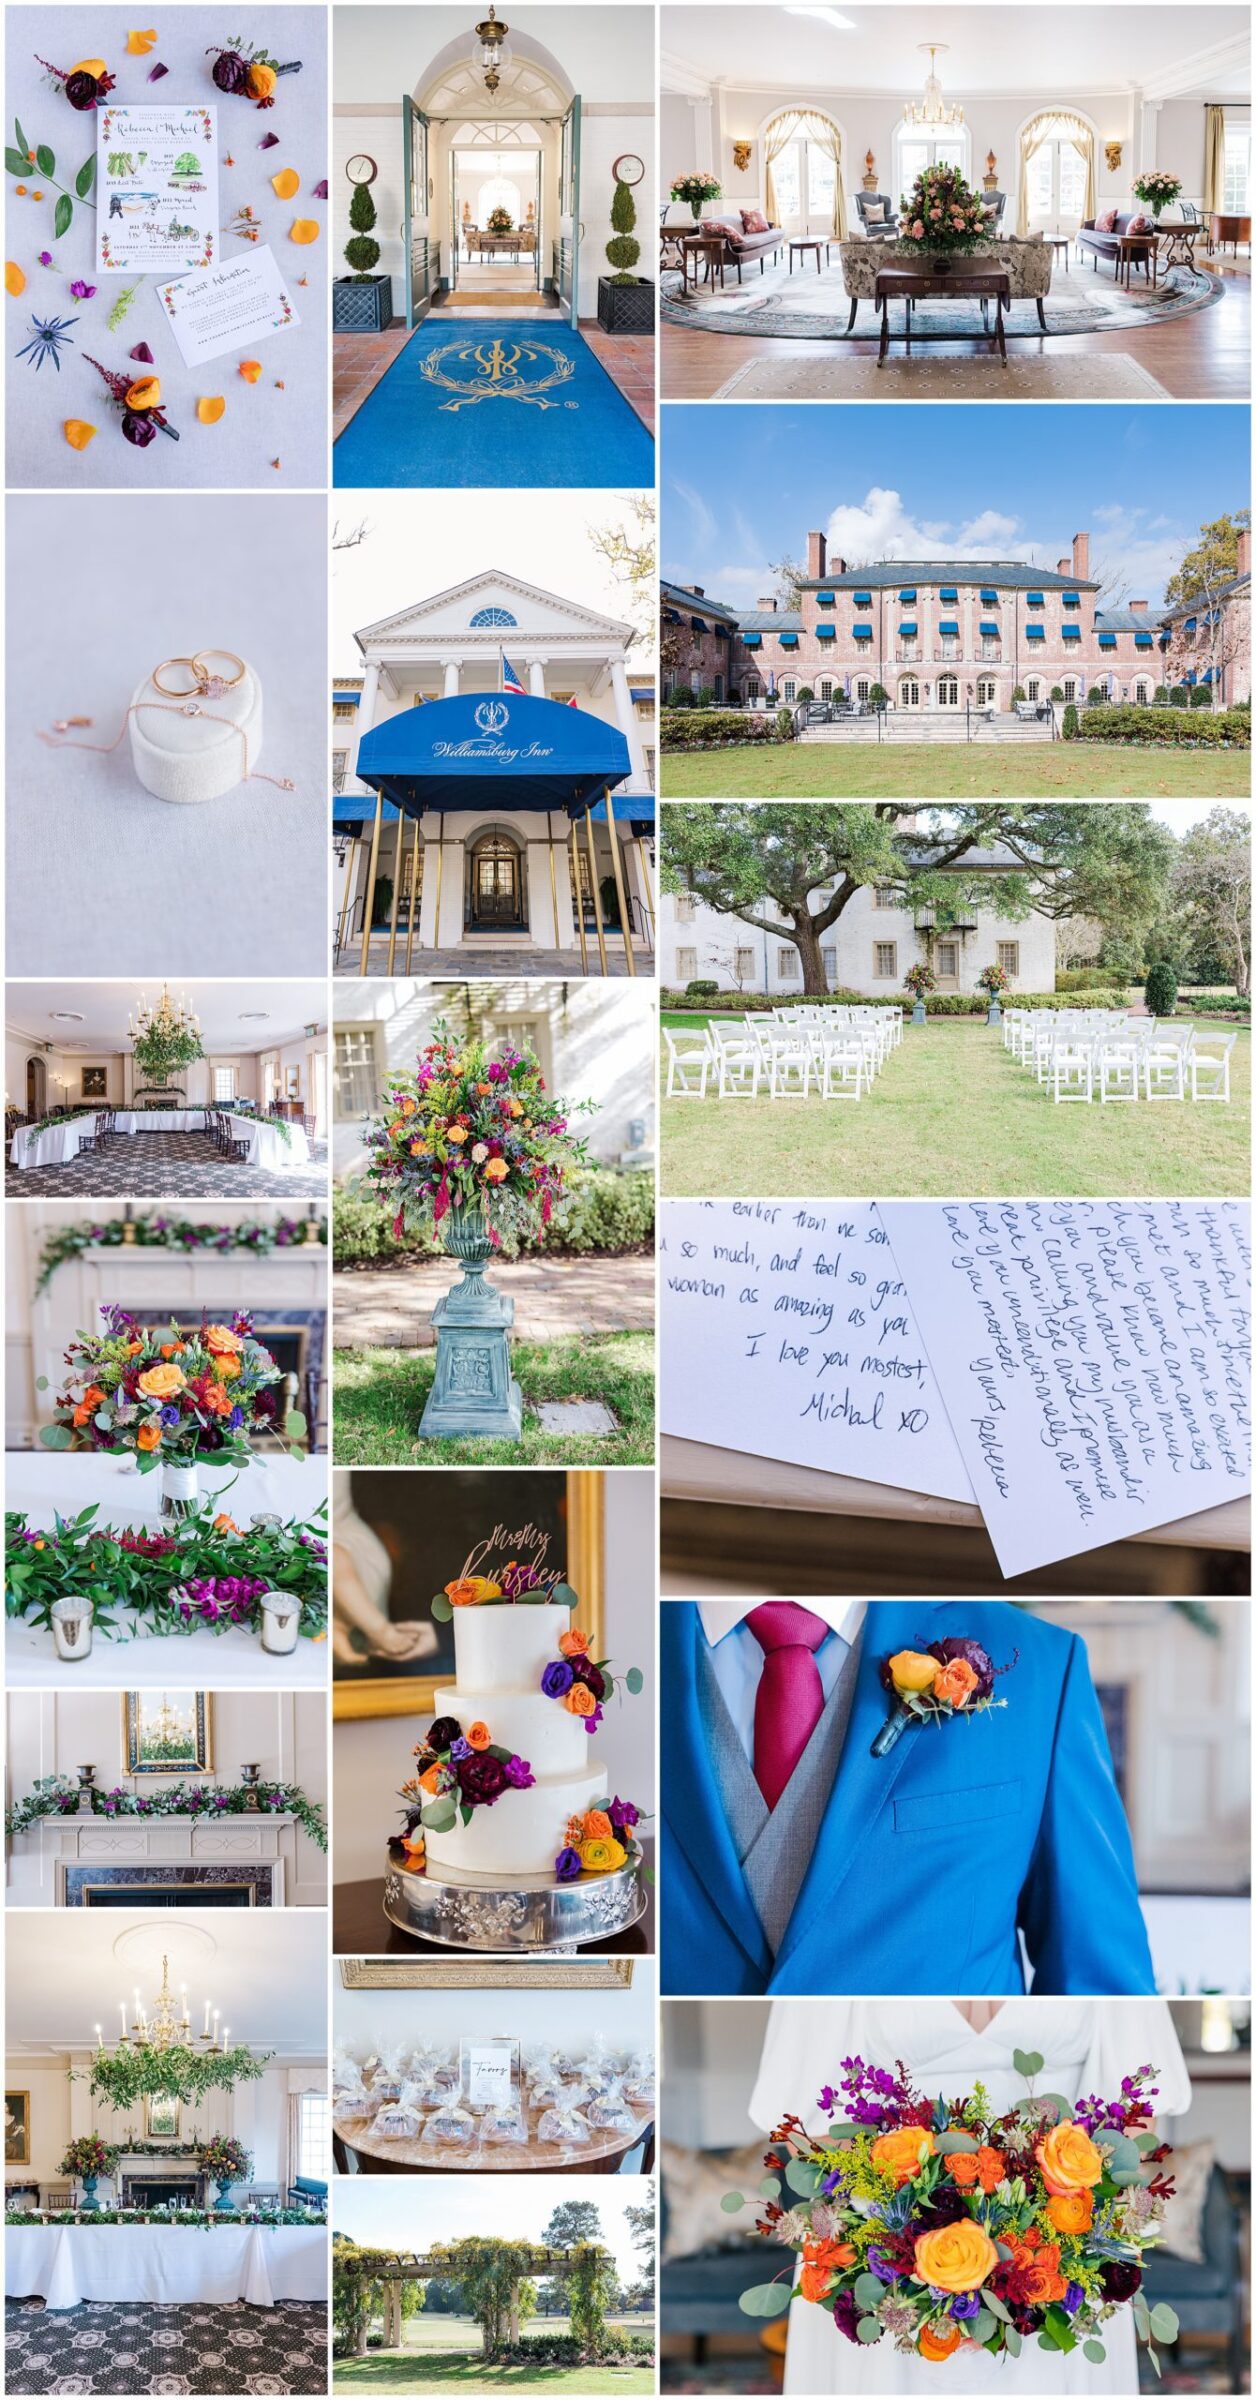 Colorful detail photos and venue pictures of the Williamsburg Inn for Rebecca and Michael's Fifes and Drum wedding